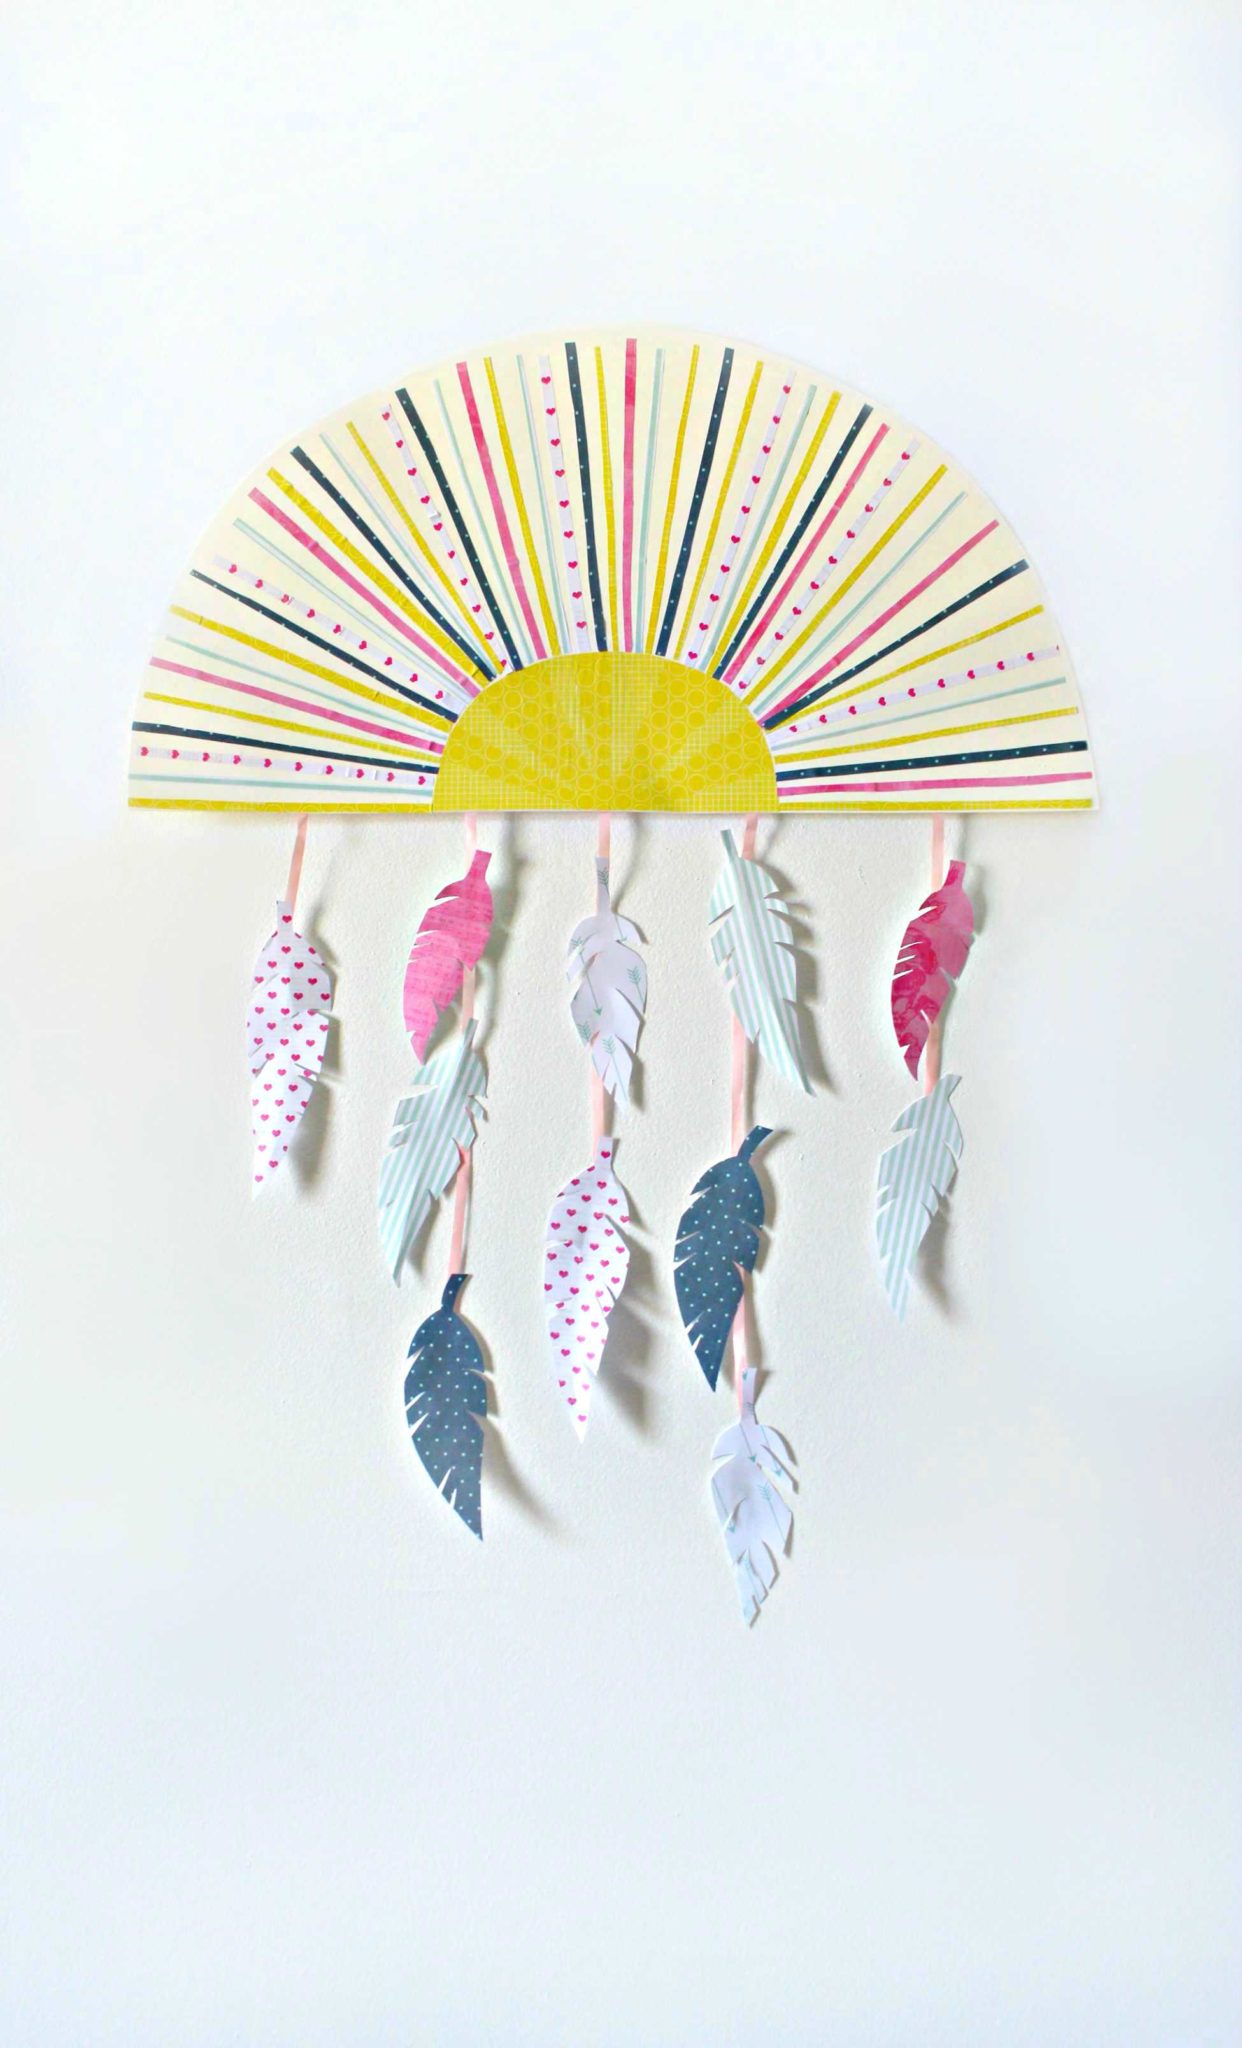 Sun & Feather Wall Decor That Will Brighten Up Your Home